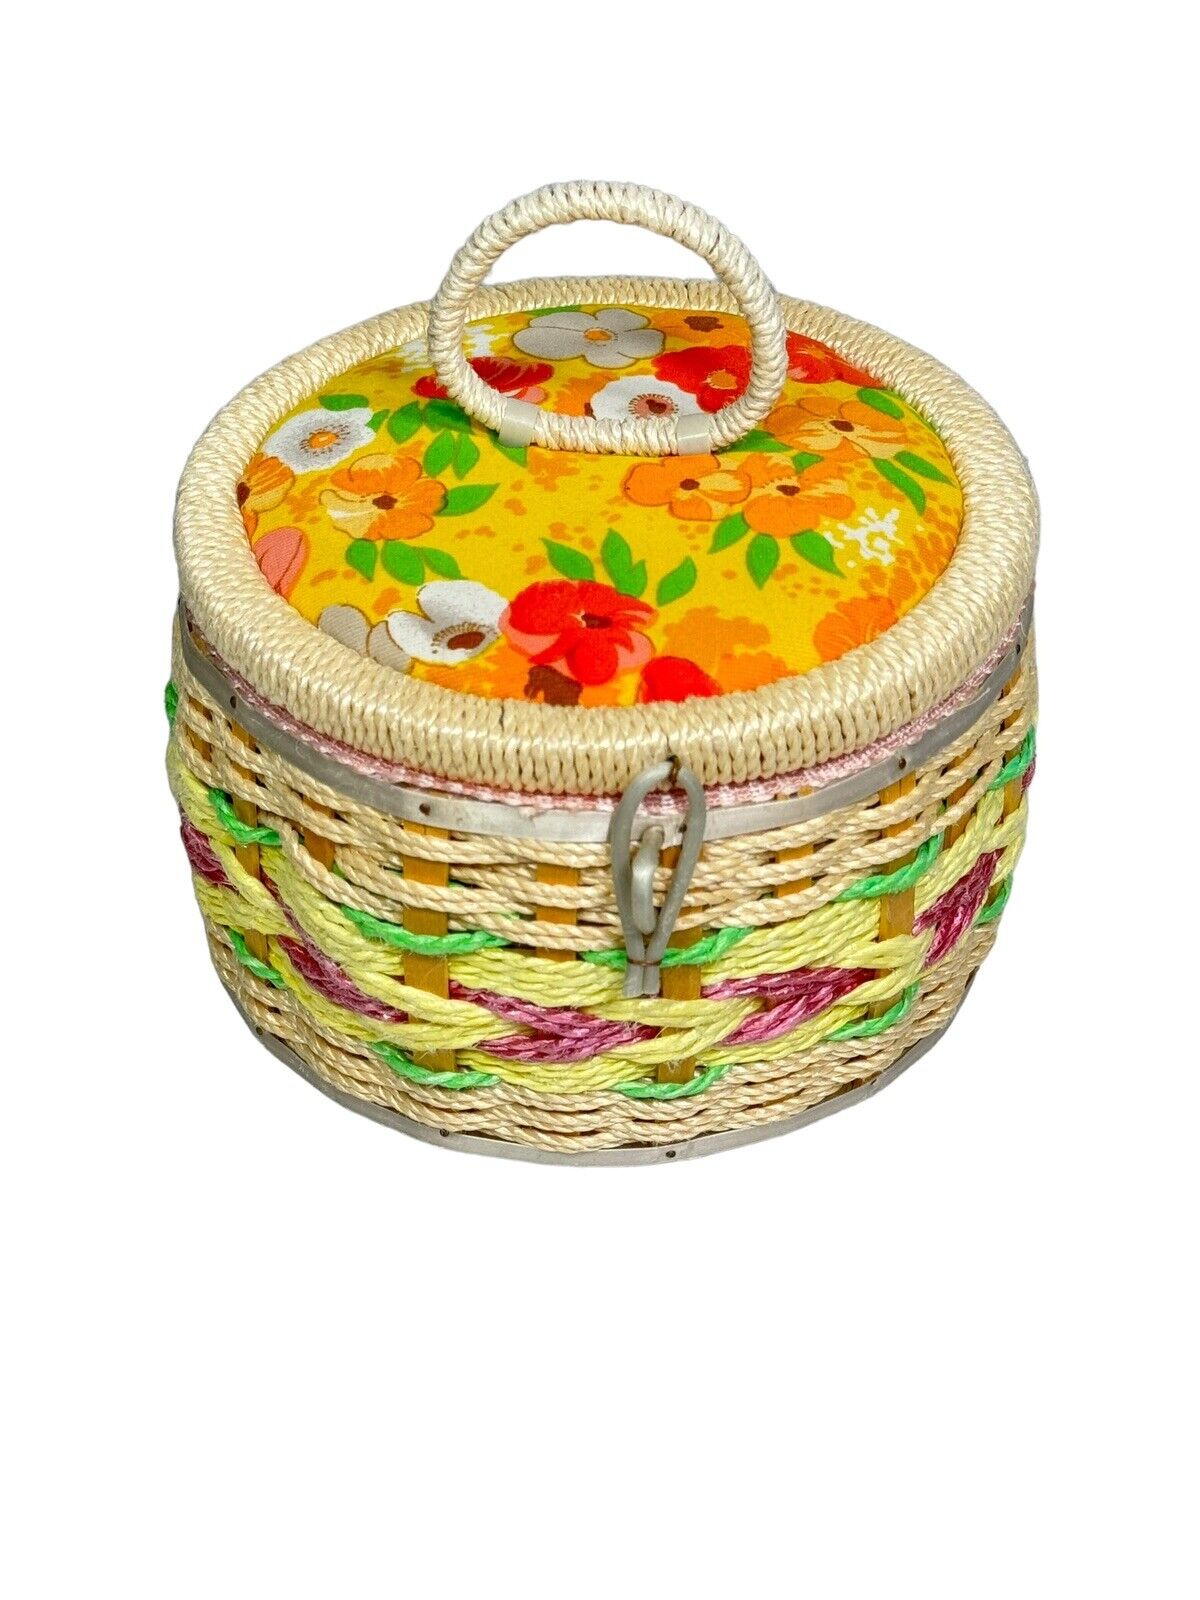 Vintage Woven Round Wicker Sewing Basket Floral Lid Lined Made in Korea 4\